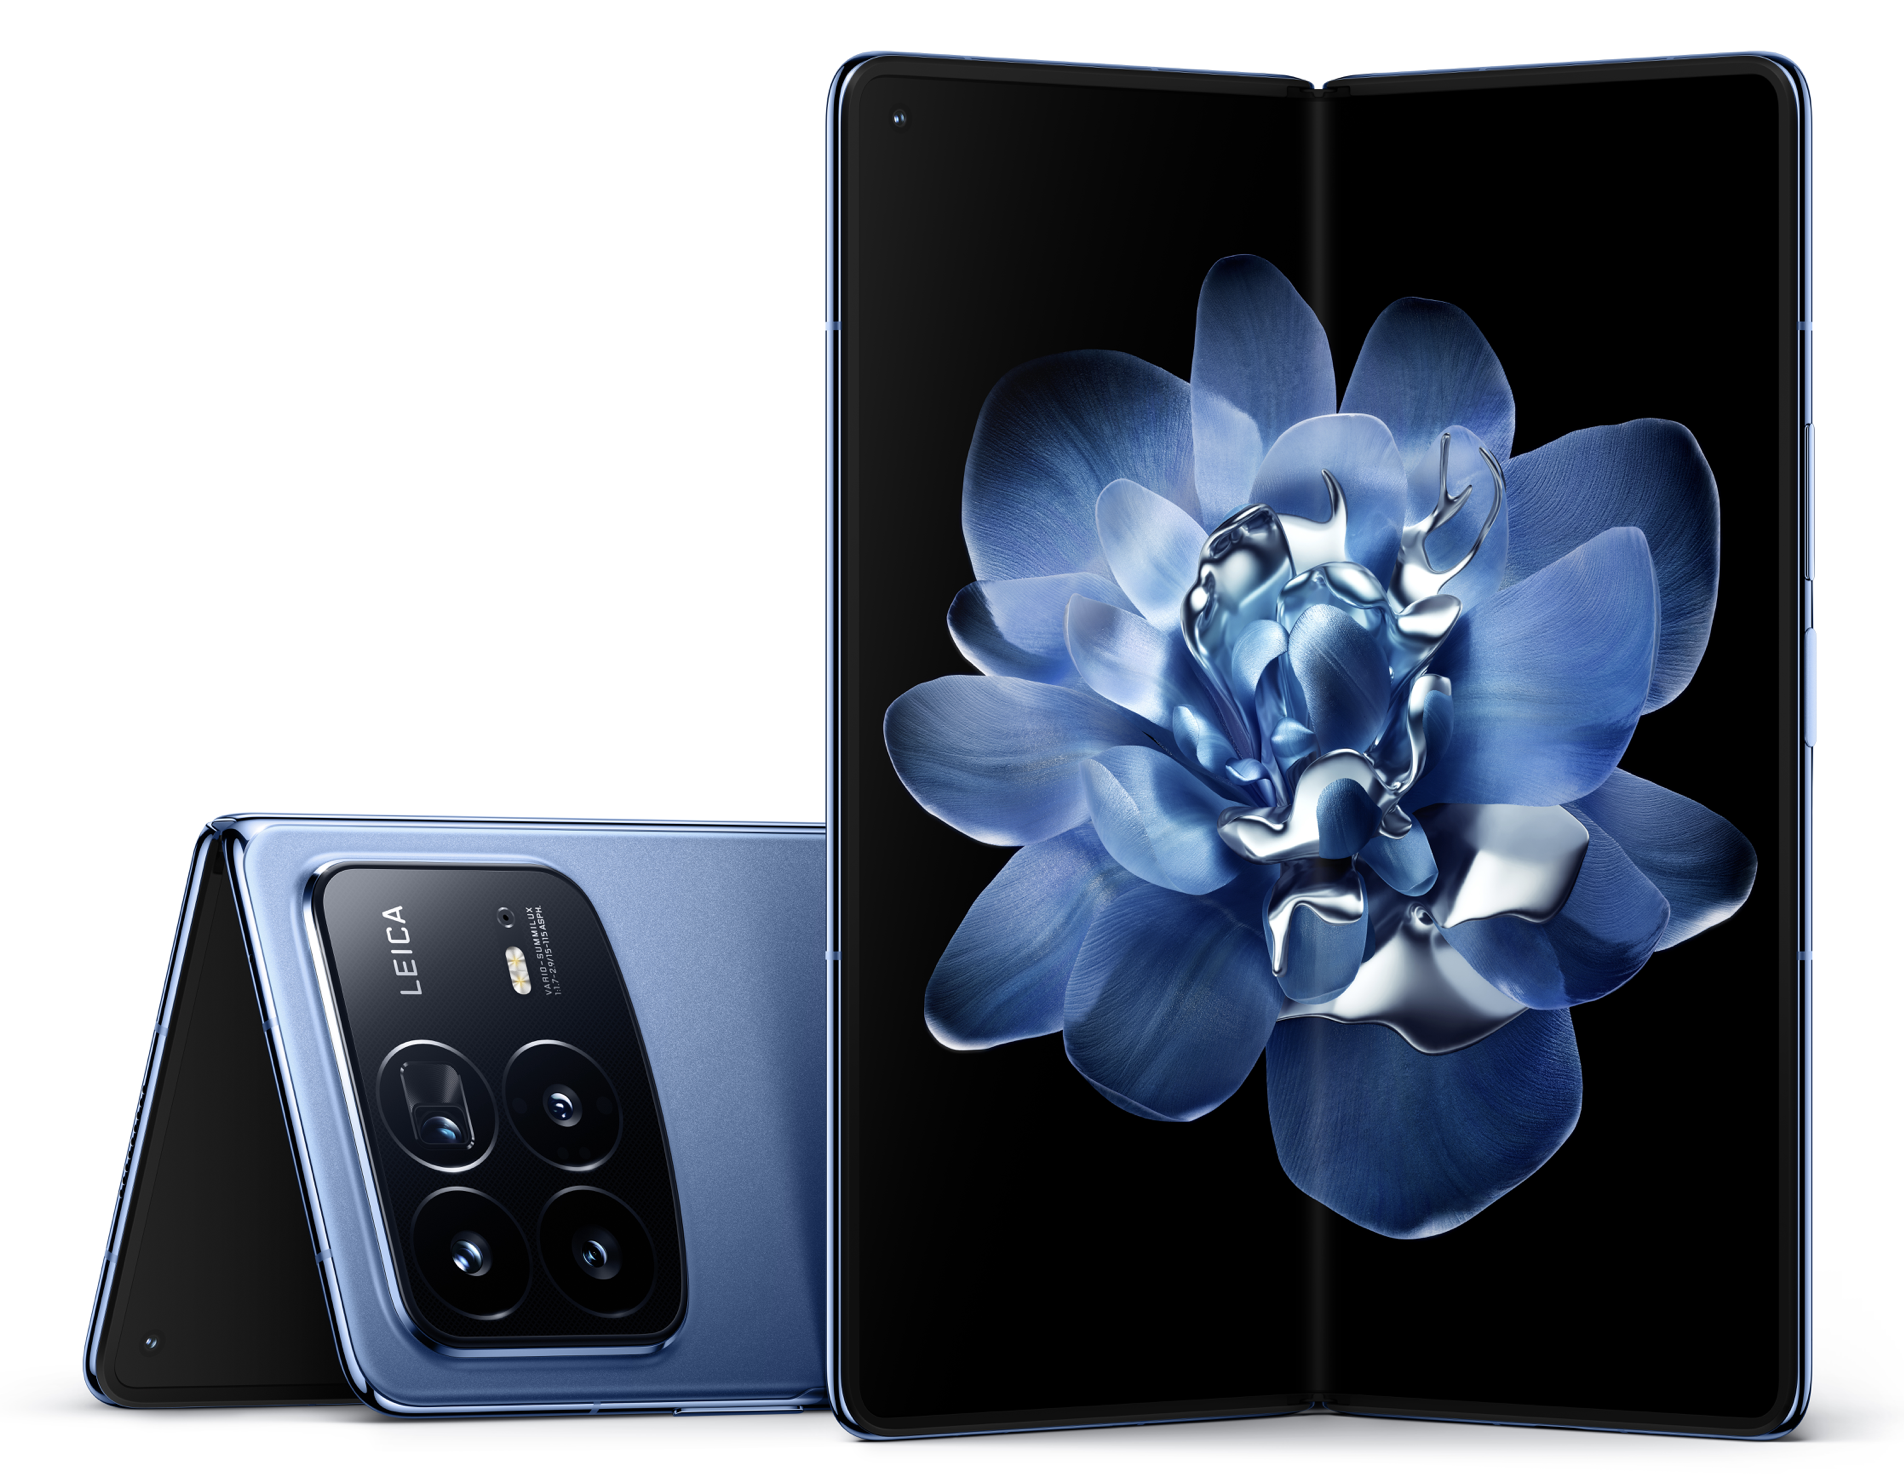 Xiaomi Announces MIX Fold 4 Ultra-Light Foldable Phone! Ultra-thin and lightweight at 4.59mm, equipped with Leica 4-lens camera for professional photography – Sumahon!!